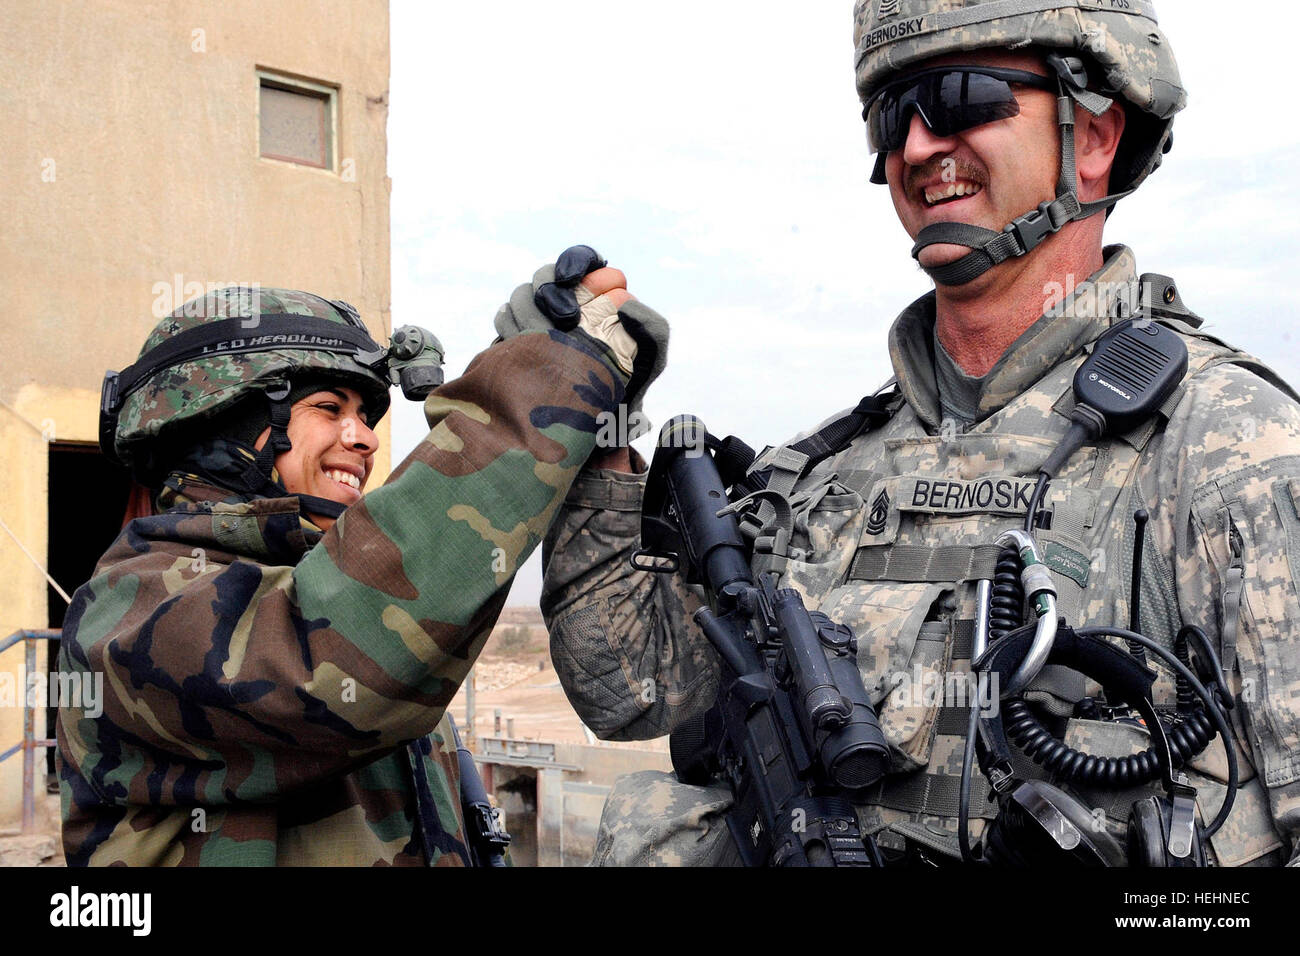 U.S Army 1st Sgt. David Bernosky, 304th Civil Affairs Brigade, congratulates an Iraqi soldier on job well done Jan. 1, 2009,  in Basra, Iraq. (U.S. Army photo by Spc. Karah Cohen/Released) Flickr - The U.S. Army - 090101-A-0832C-107 Stock Photo